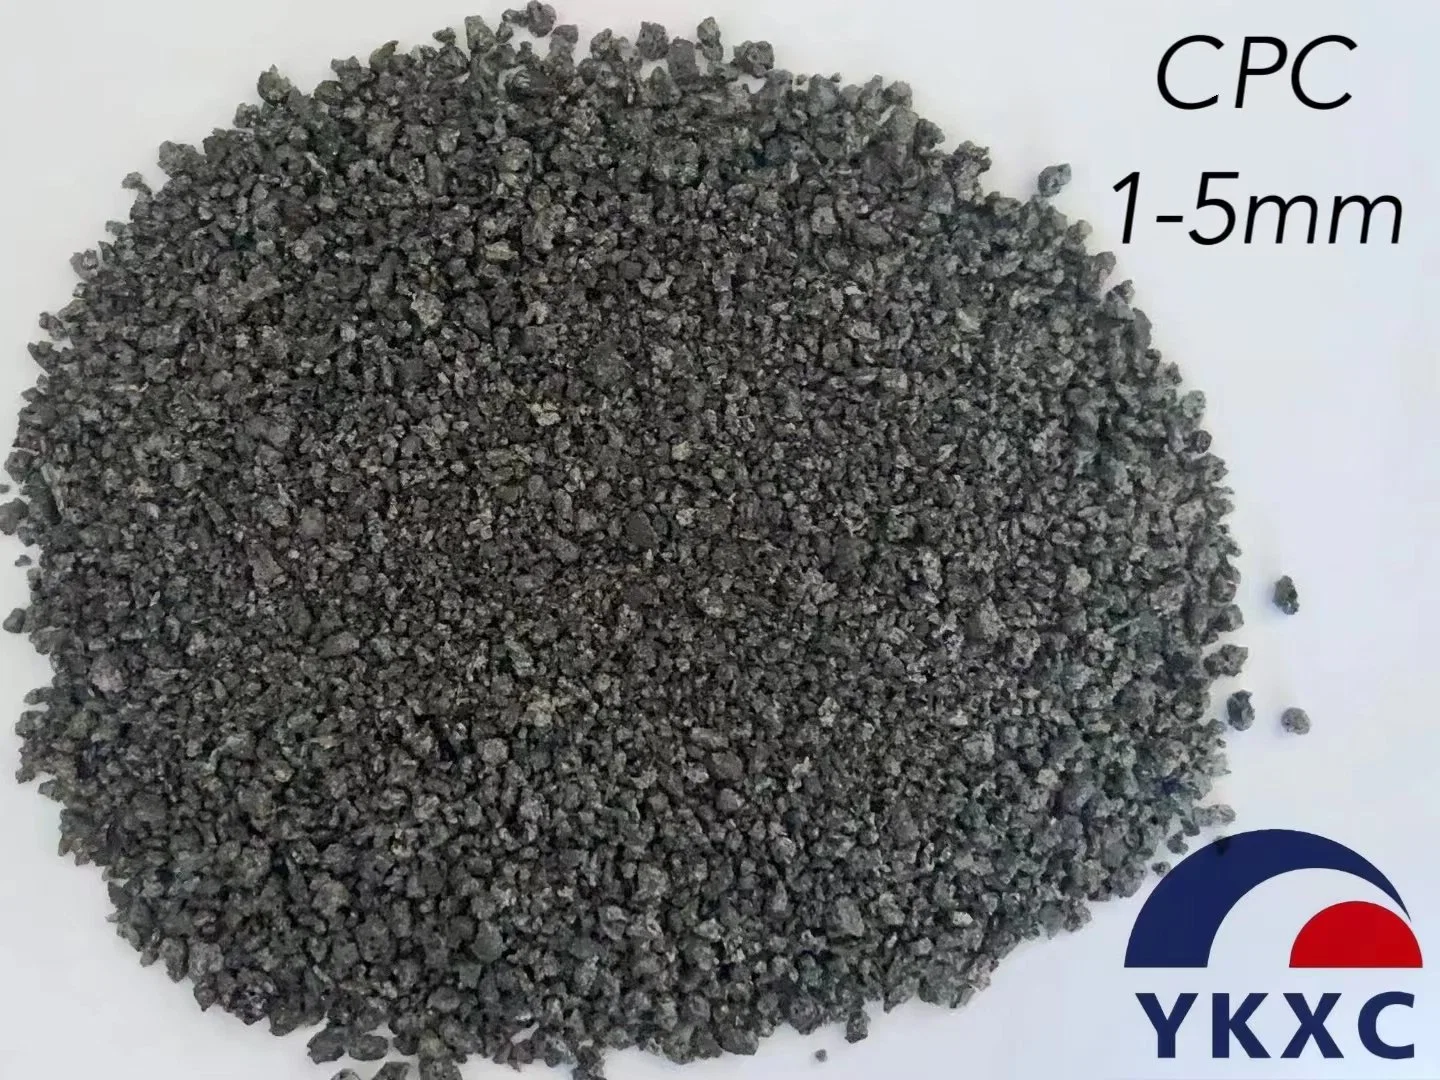 Calcined Petroleum Coke (CPC) Widely Used in Steel Plant, Sulfur Content 0.5%Max